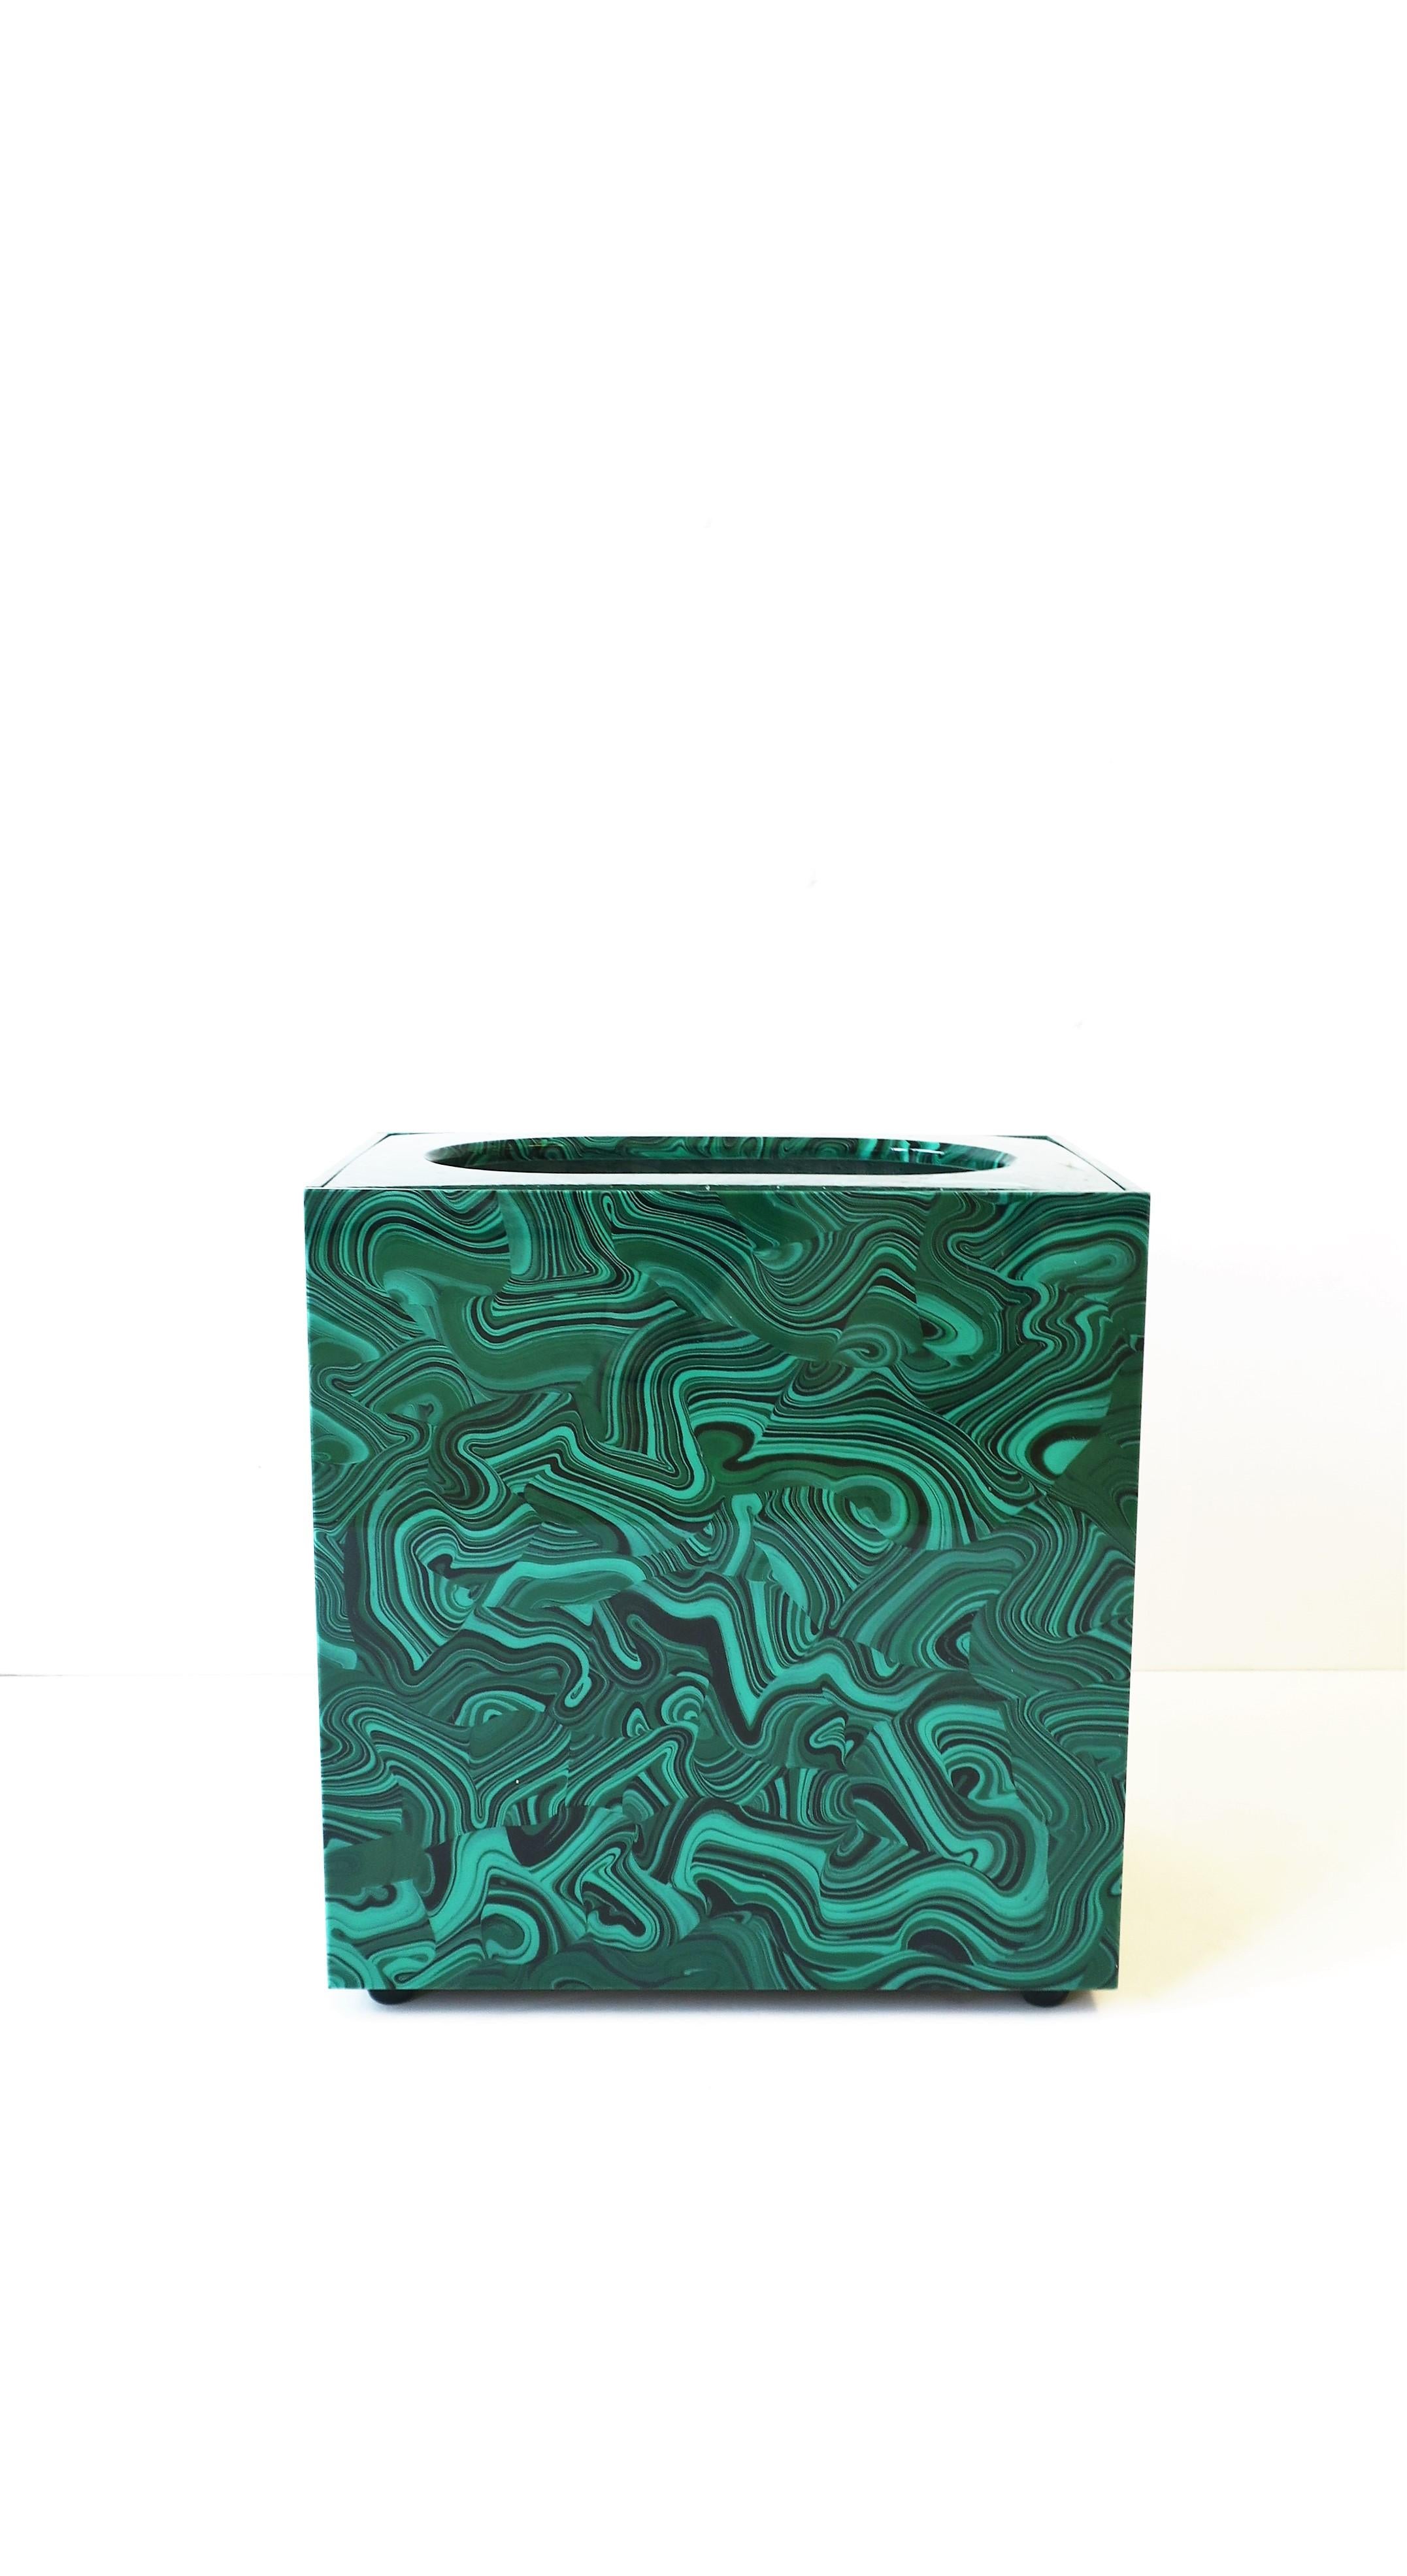 A striking green malachite style resin wastebasket or trash can. Piece is rectangular in shape and convenient for an office, dressing room closet, vanity/bathroom area, etc. Piece measures: 7.13